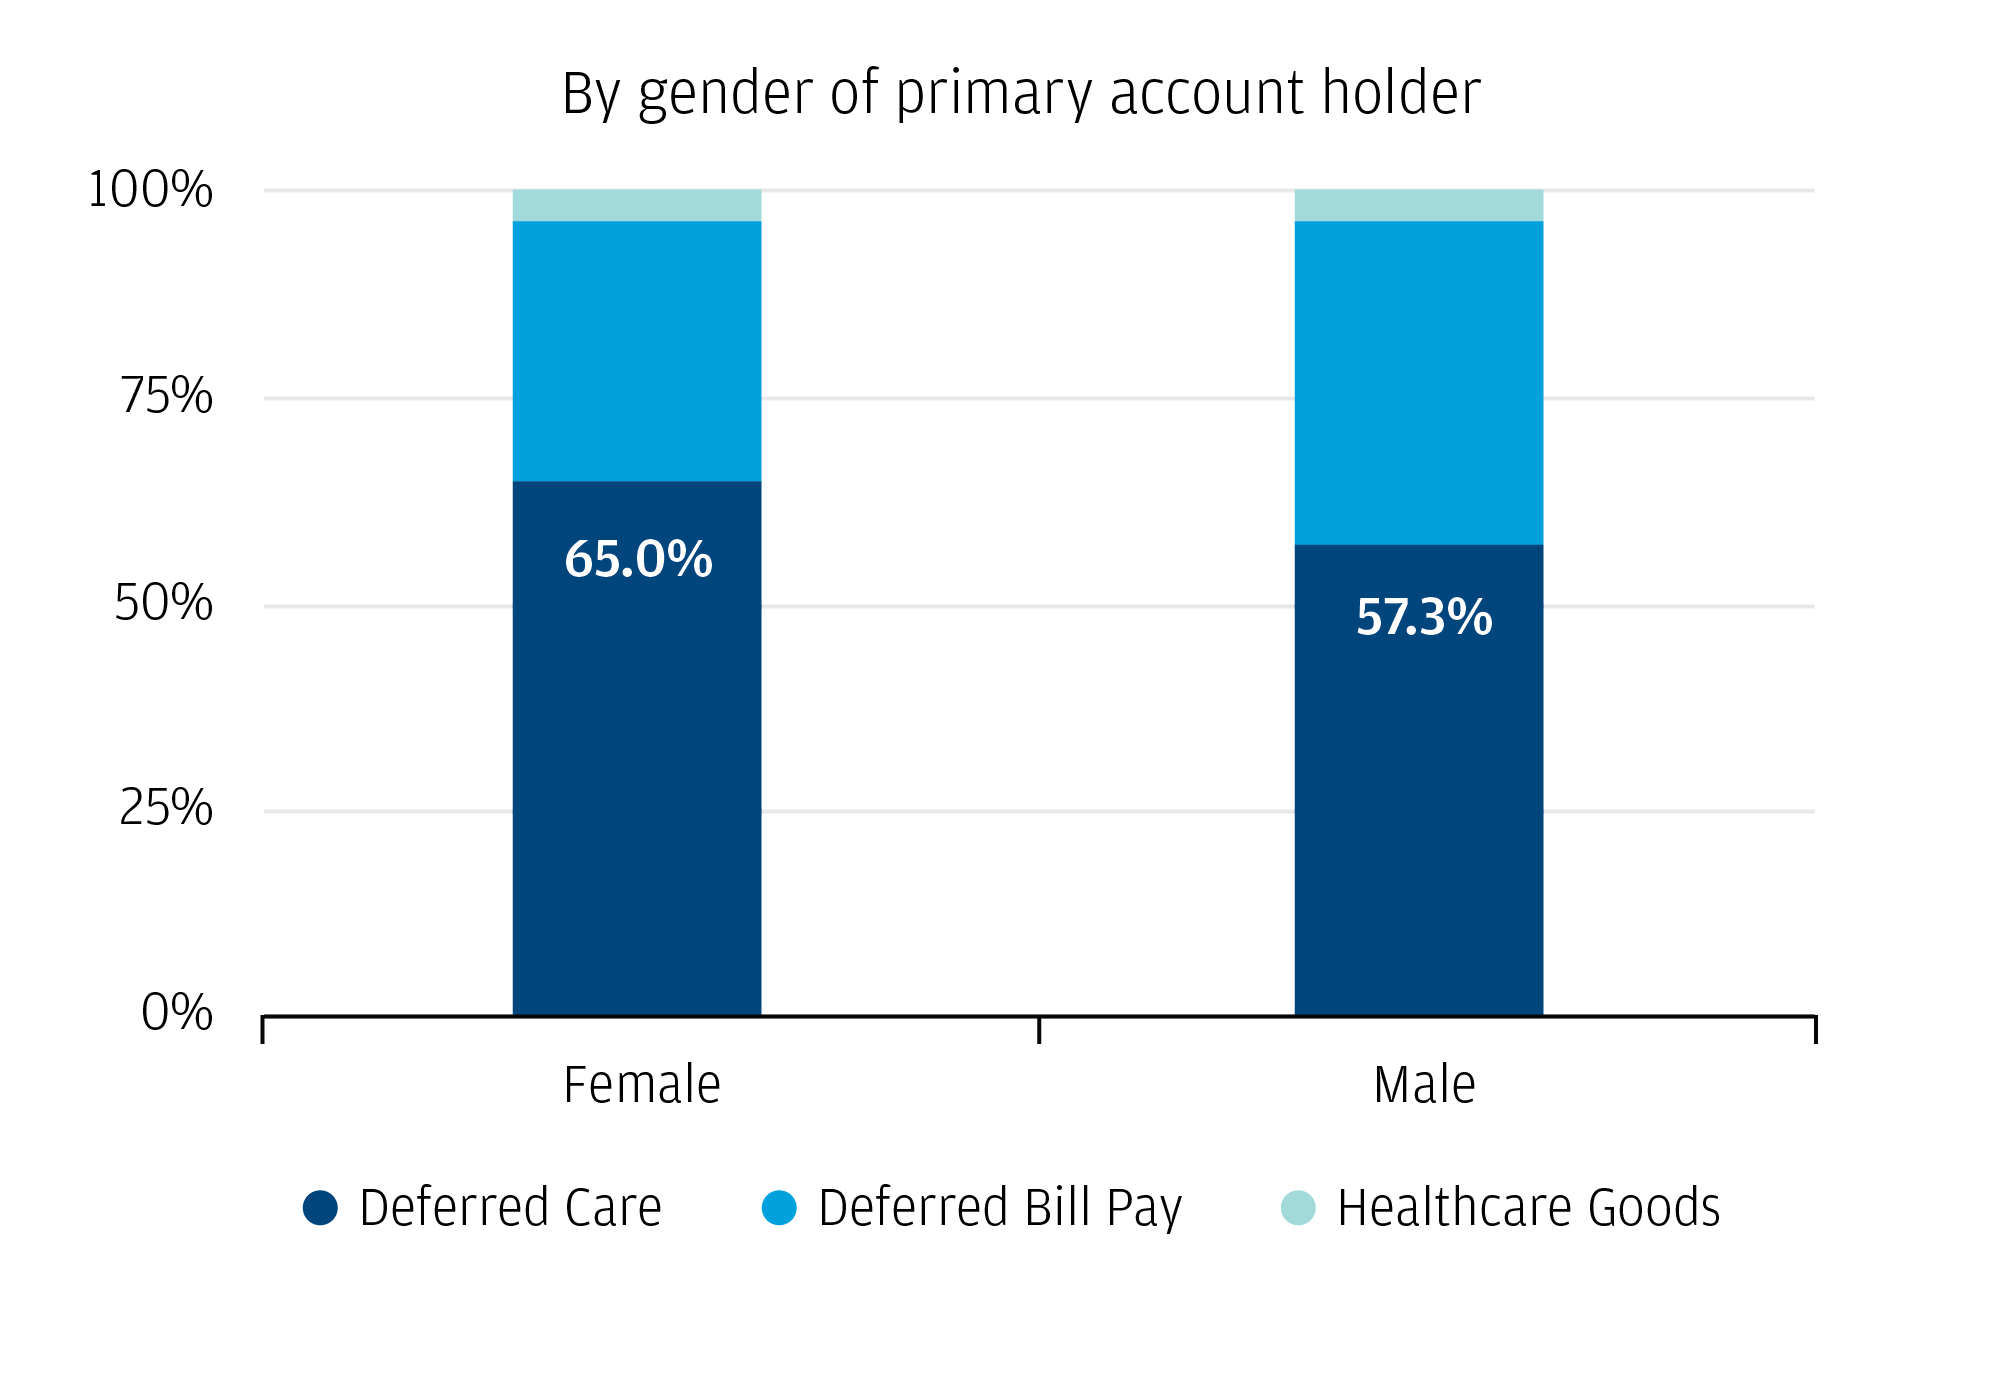 Bar graph describes about deferred care represented a larger fraction of tax-refund triggered healthcare spending form female account holders compared to male account holders